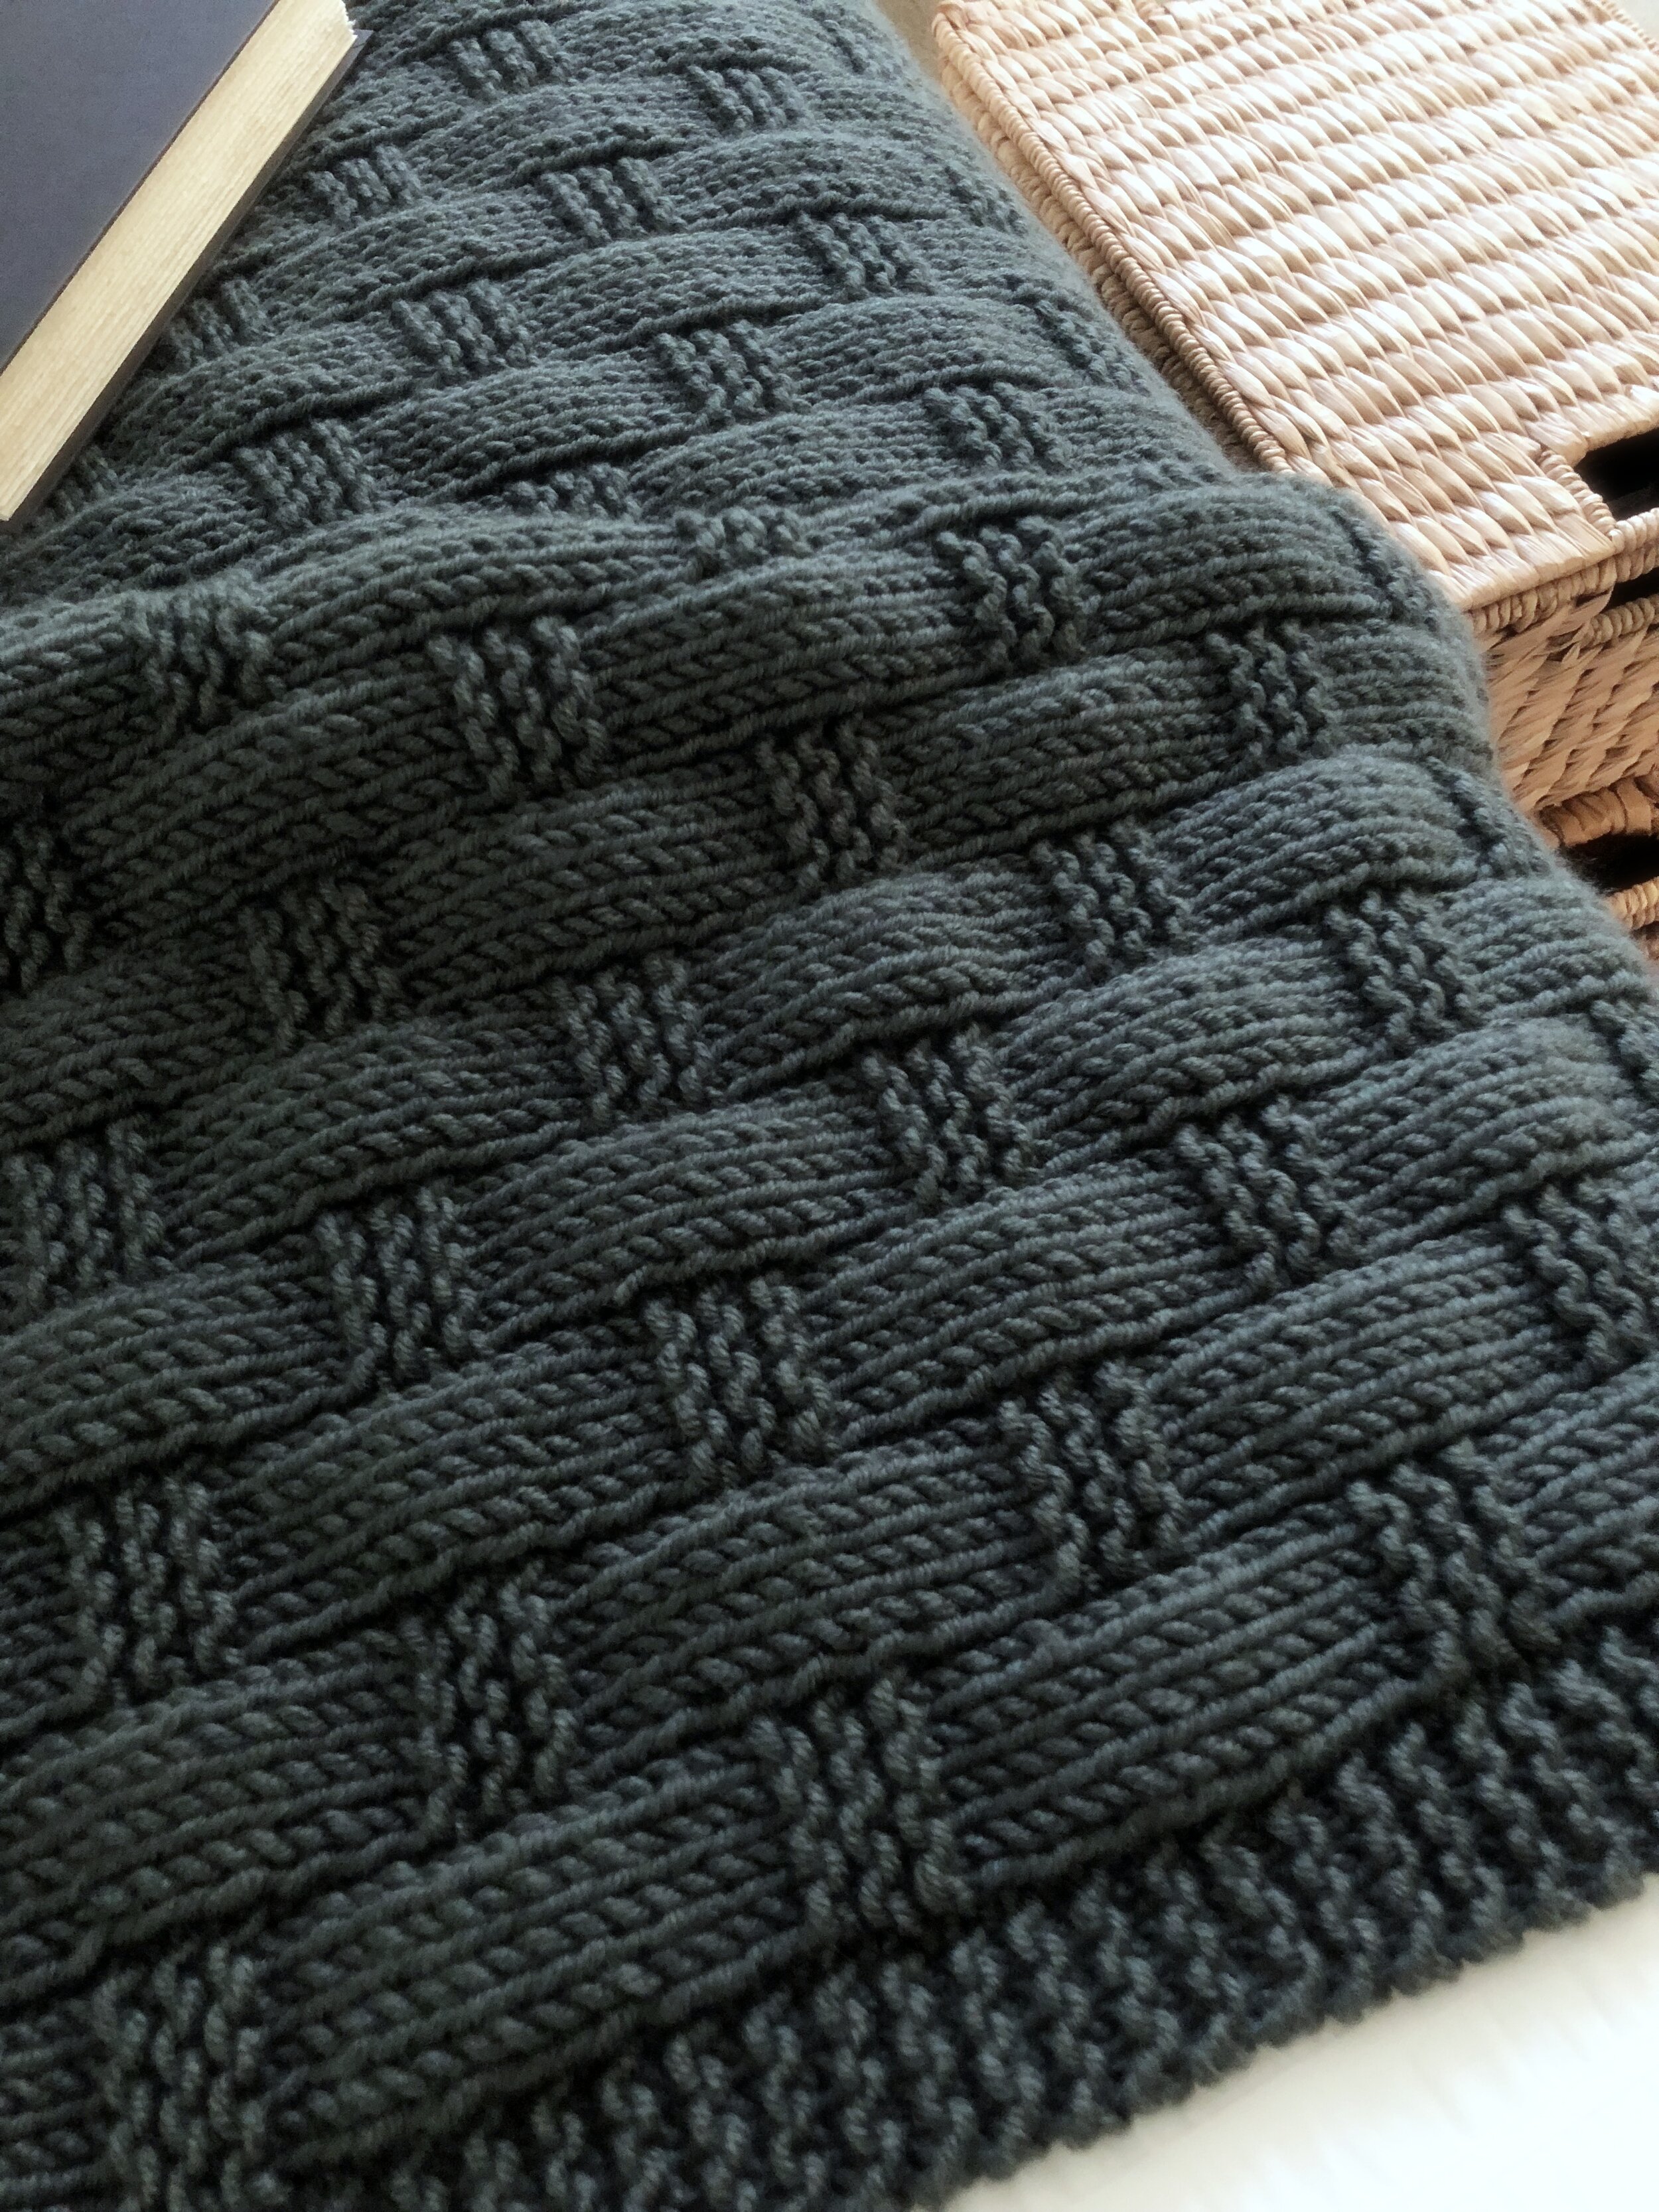 15 Bulky Yarn Suggestions for Knitting Chunky Blankets — Fifty